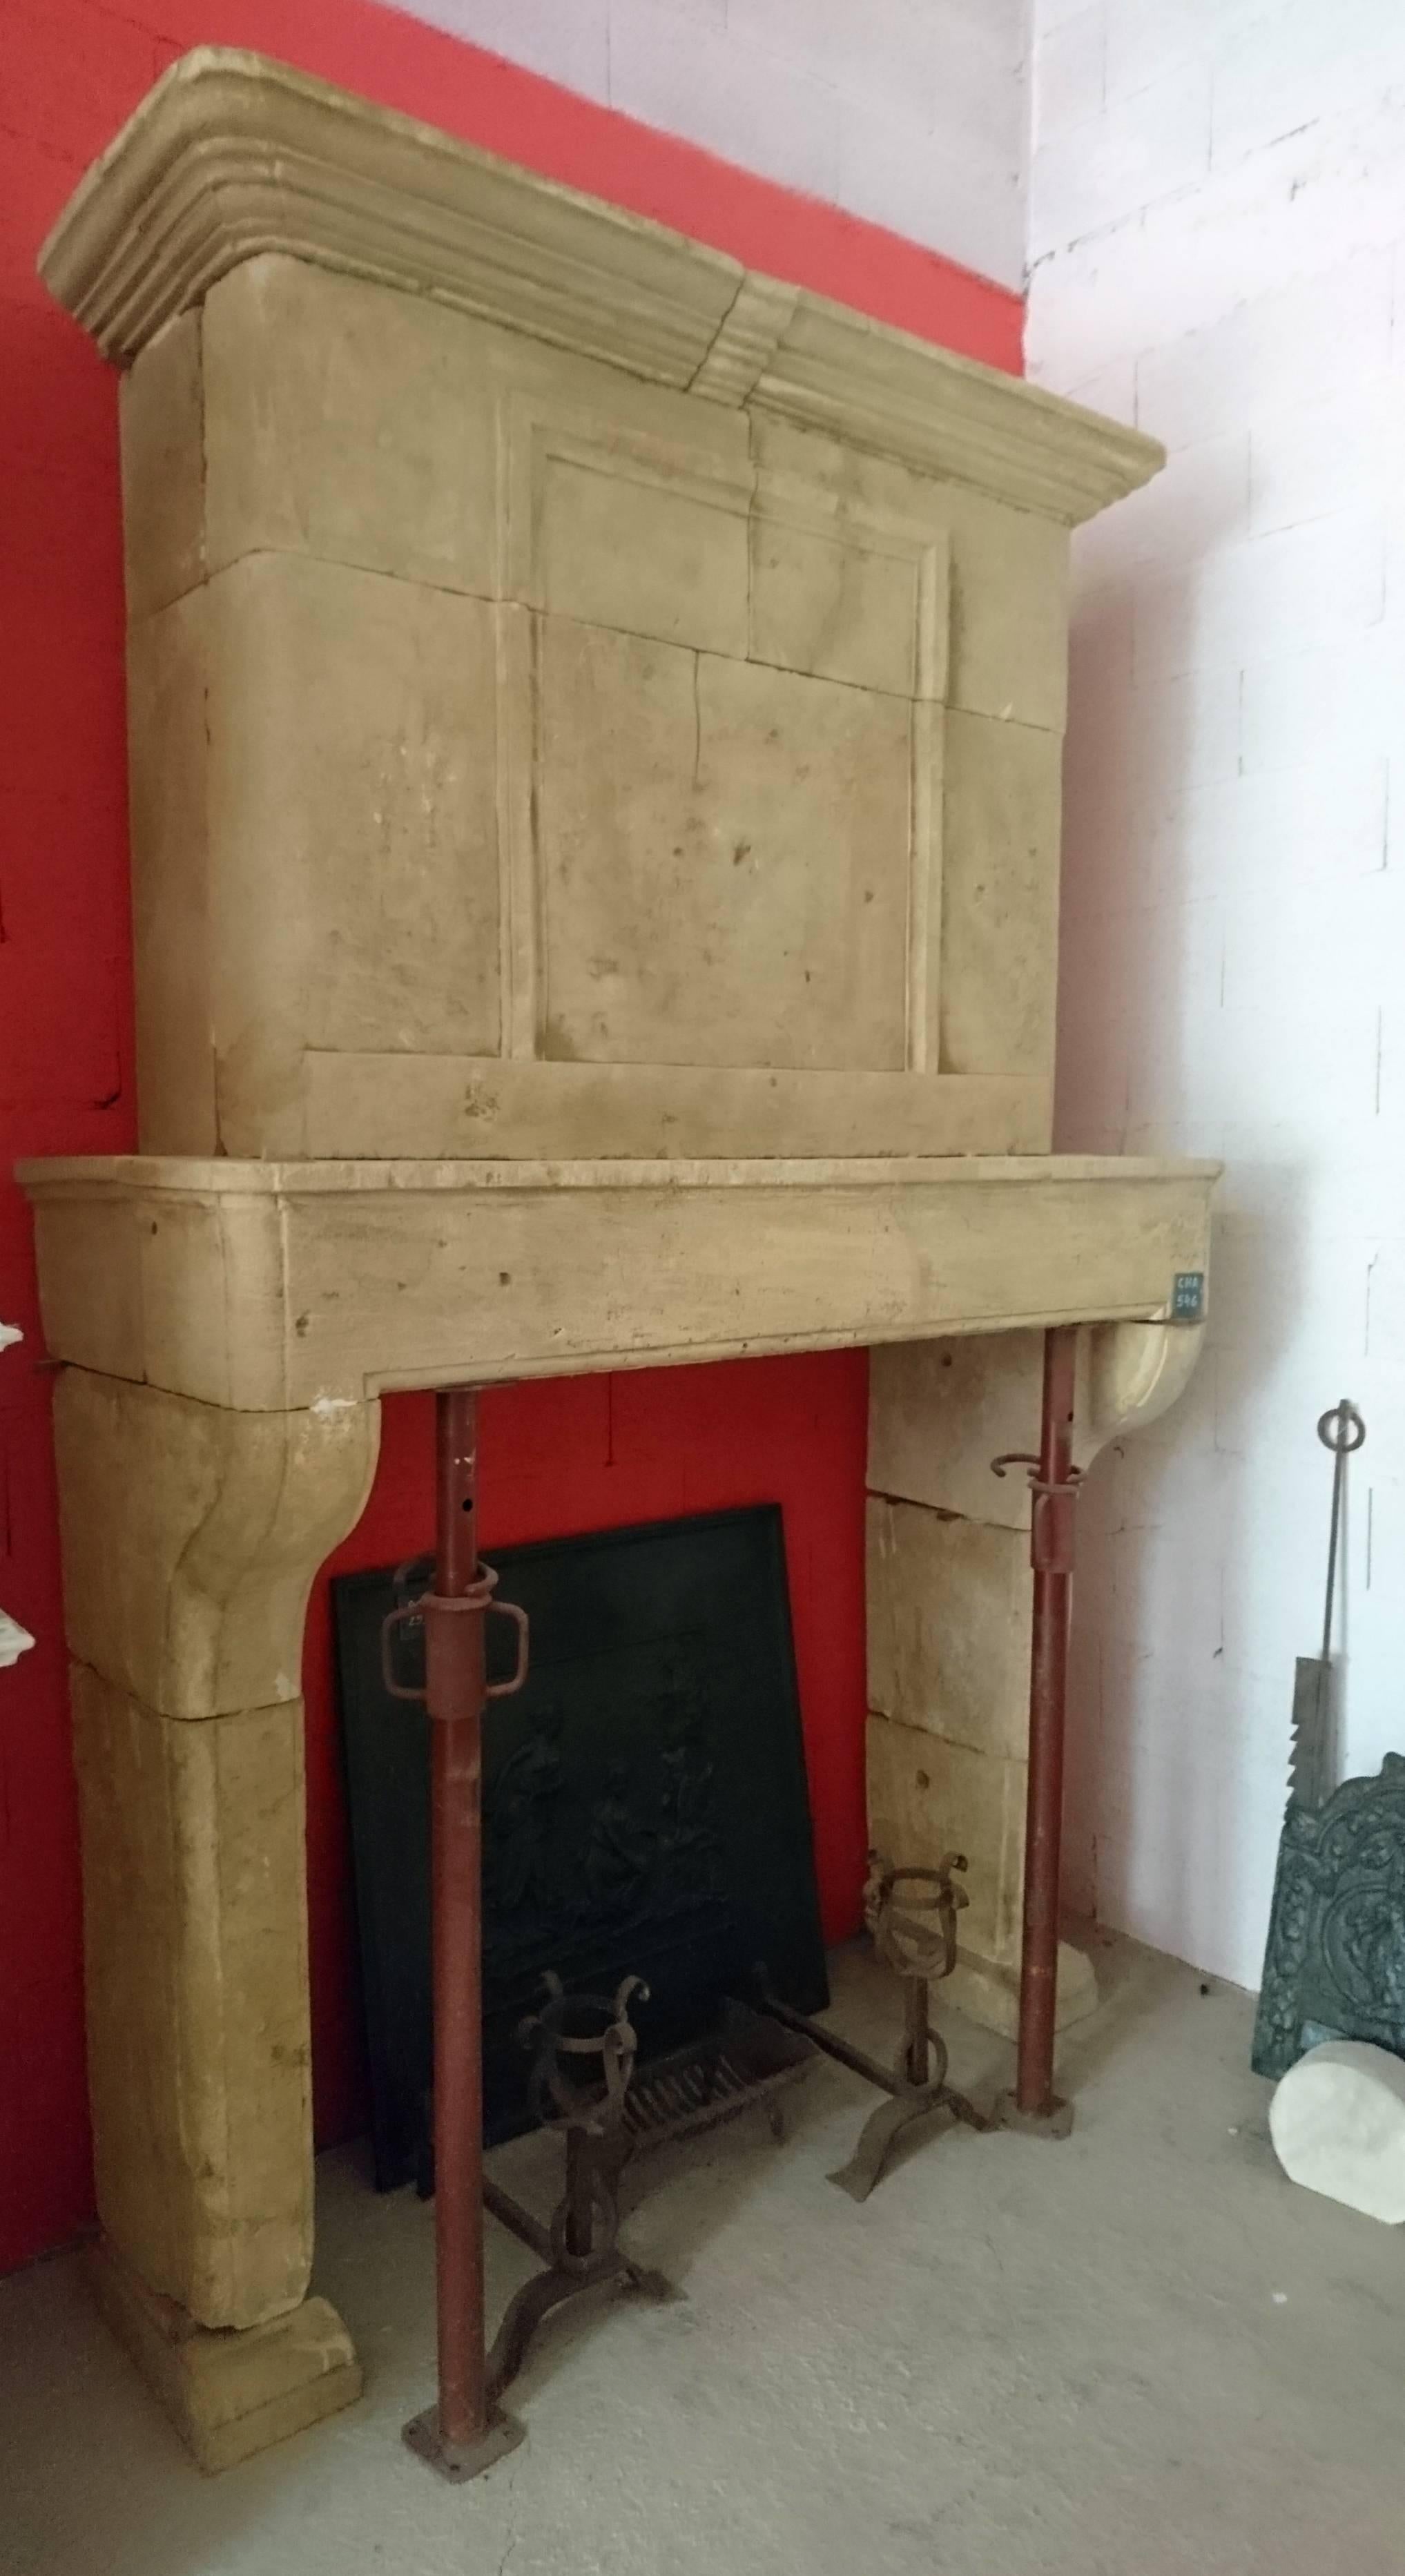 This Louis XIII country-style fireplace has been carved in a natural French limestone by a master stone cutter of the 17th century.

It is quite sober. The foot blocks are rectangular and monolithic. Its thin and slender jambs have chamfered outer